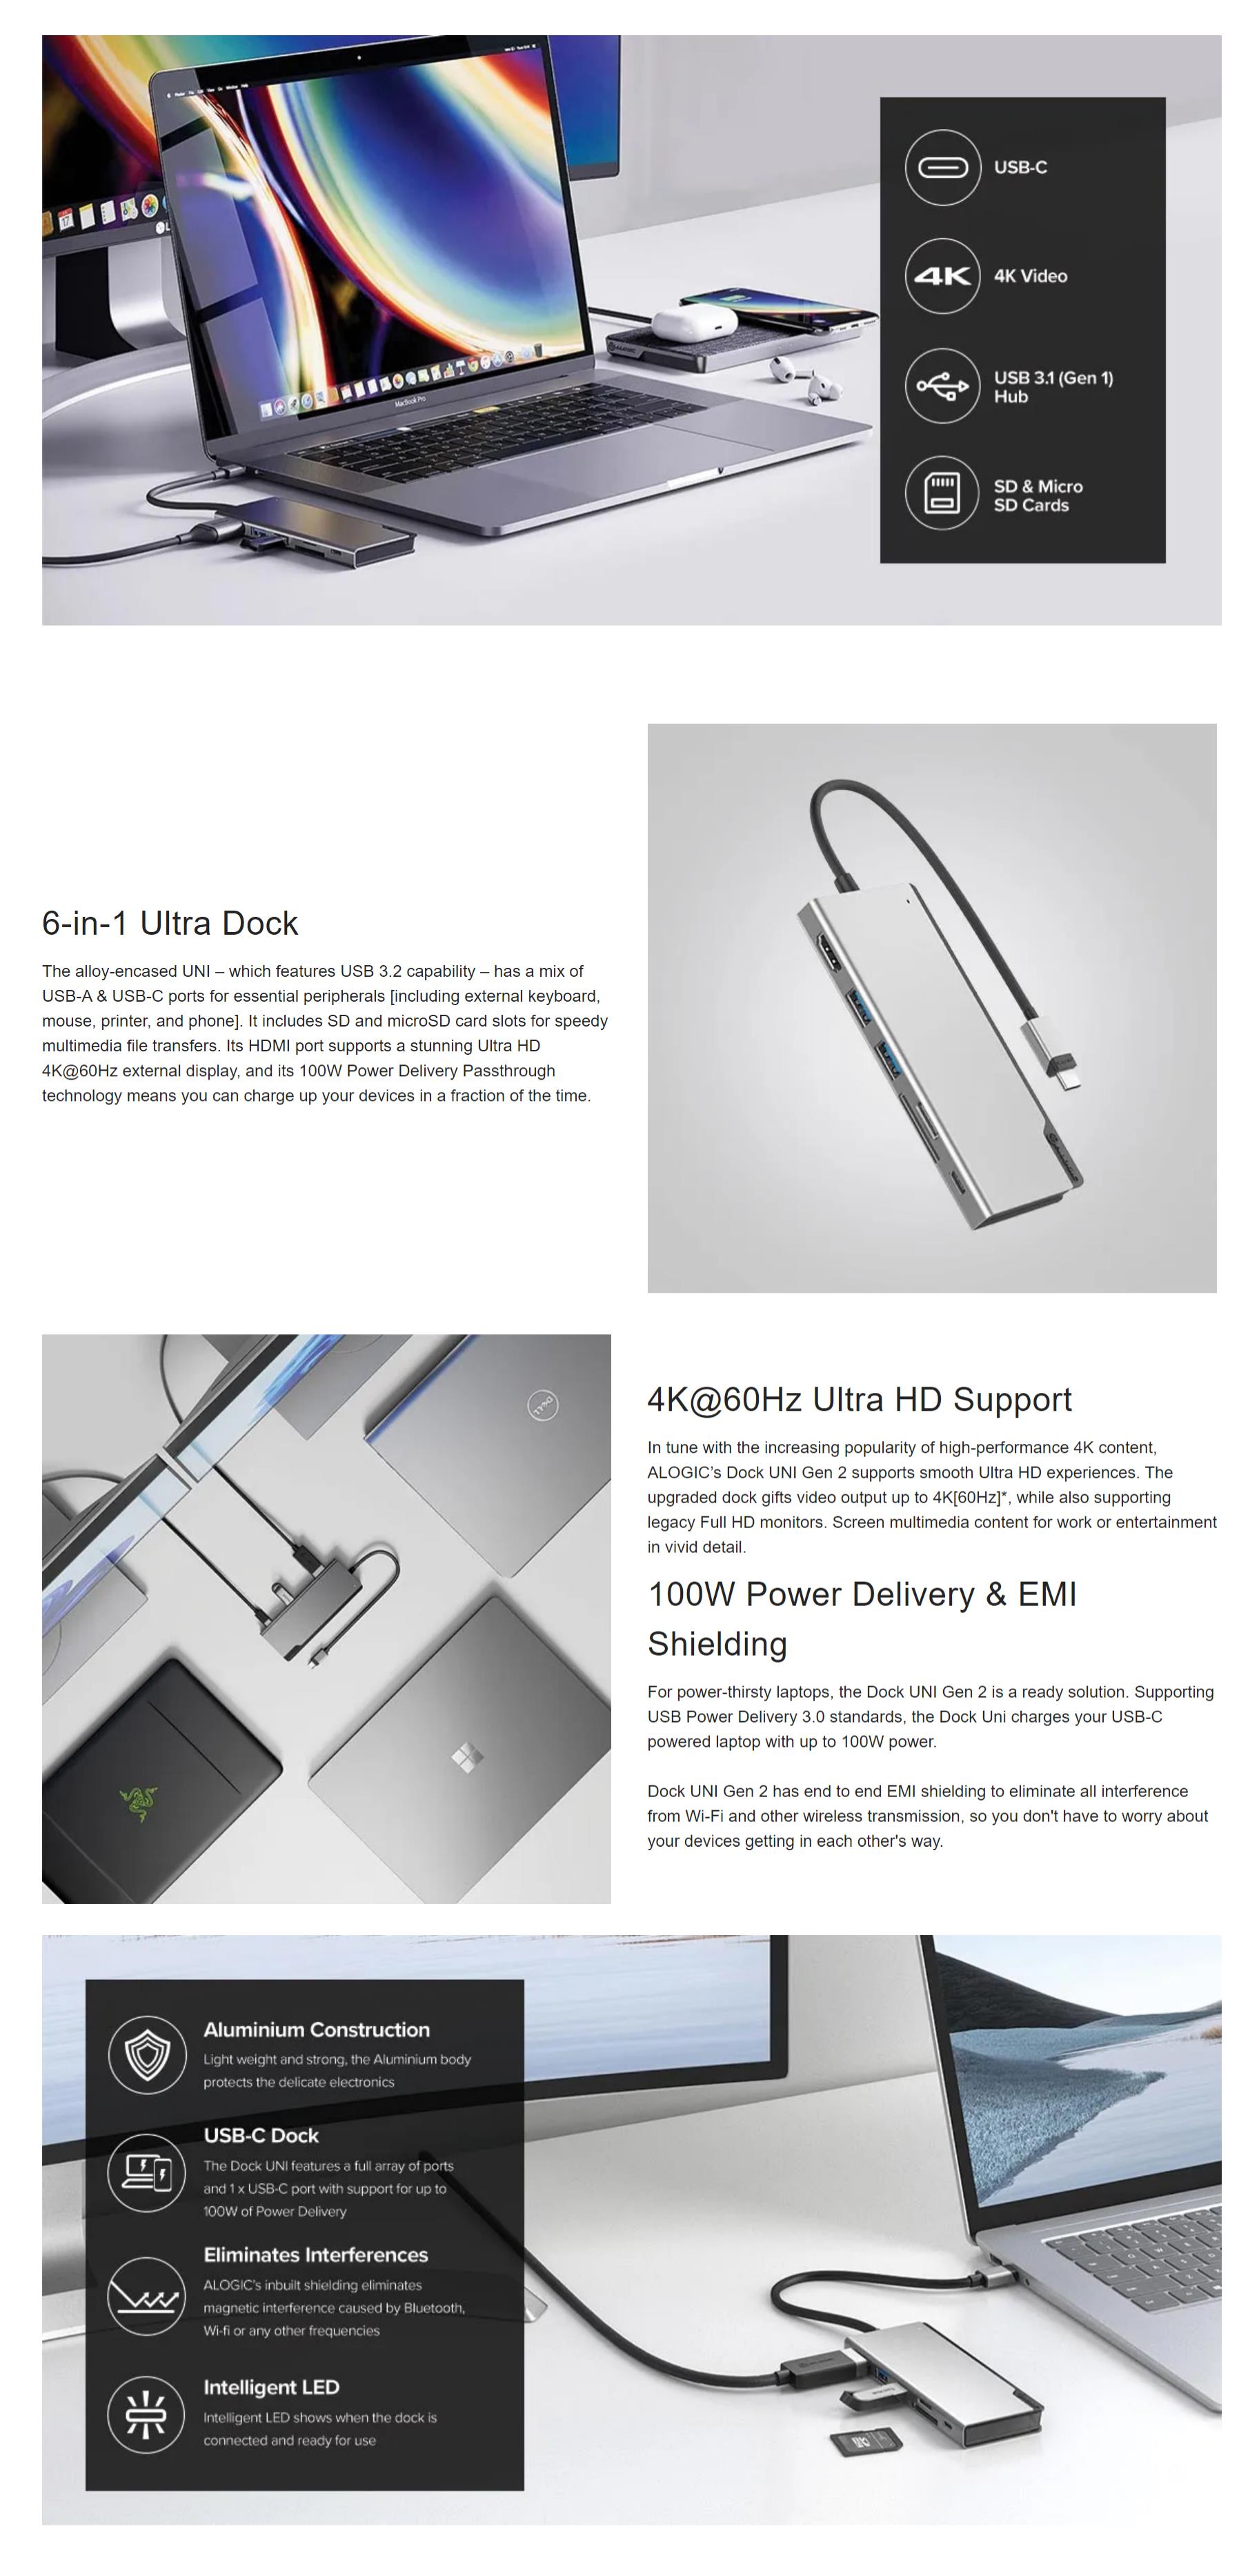 A large marketing image providing additional information about the product ALOGIC USB-C Ultra Dock UNI Gen 2 w/ Power Delivery - Additional alt info not provided